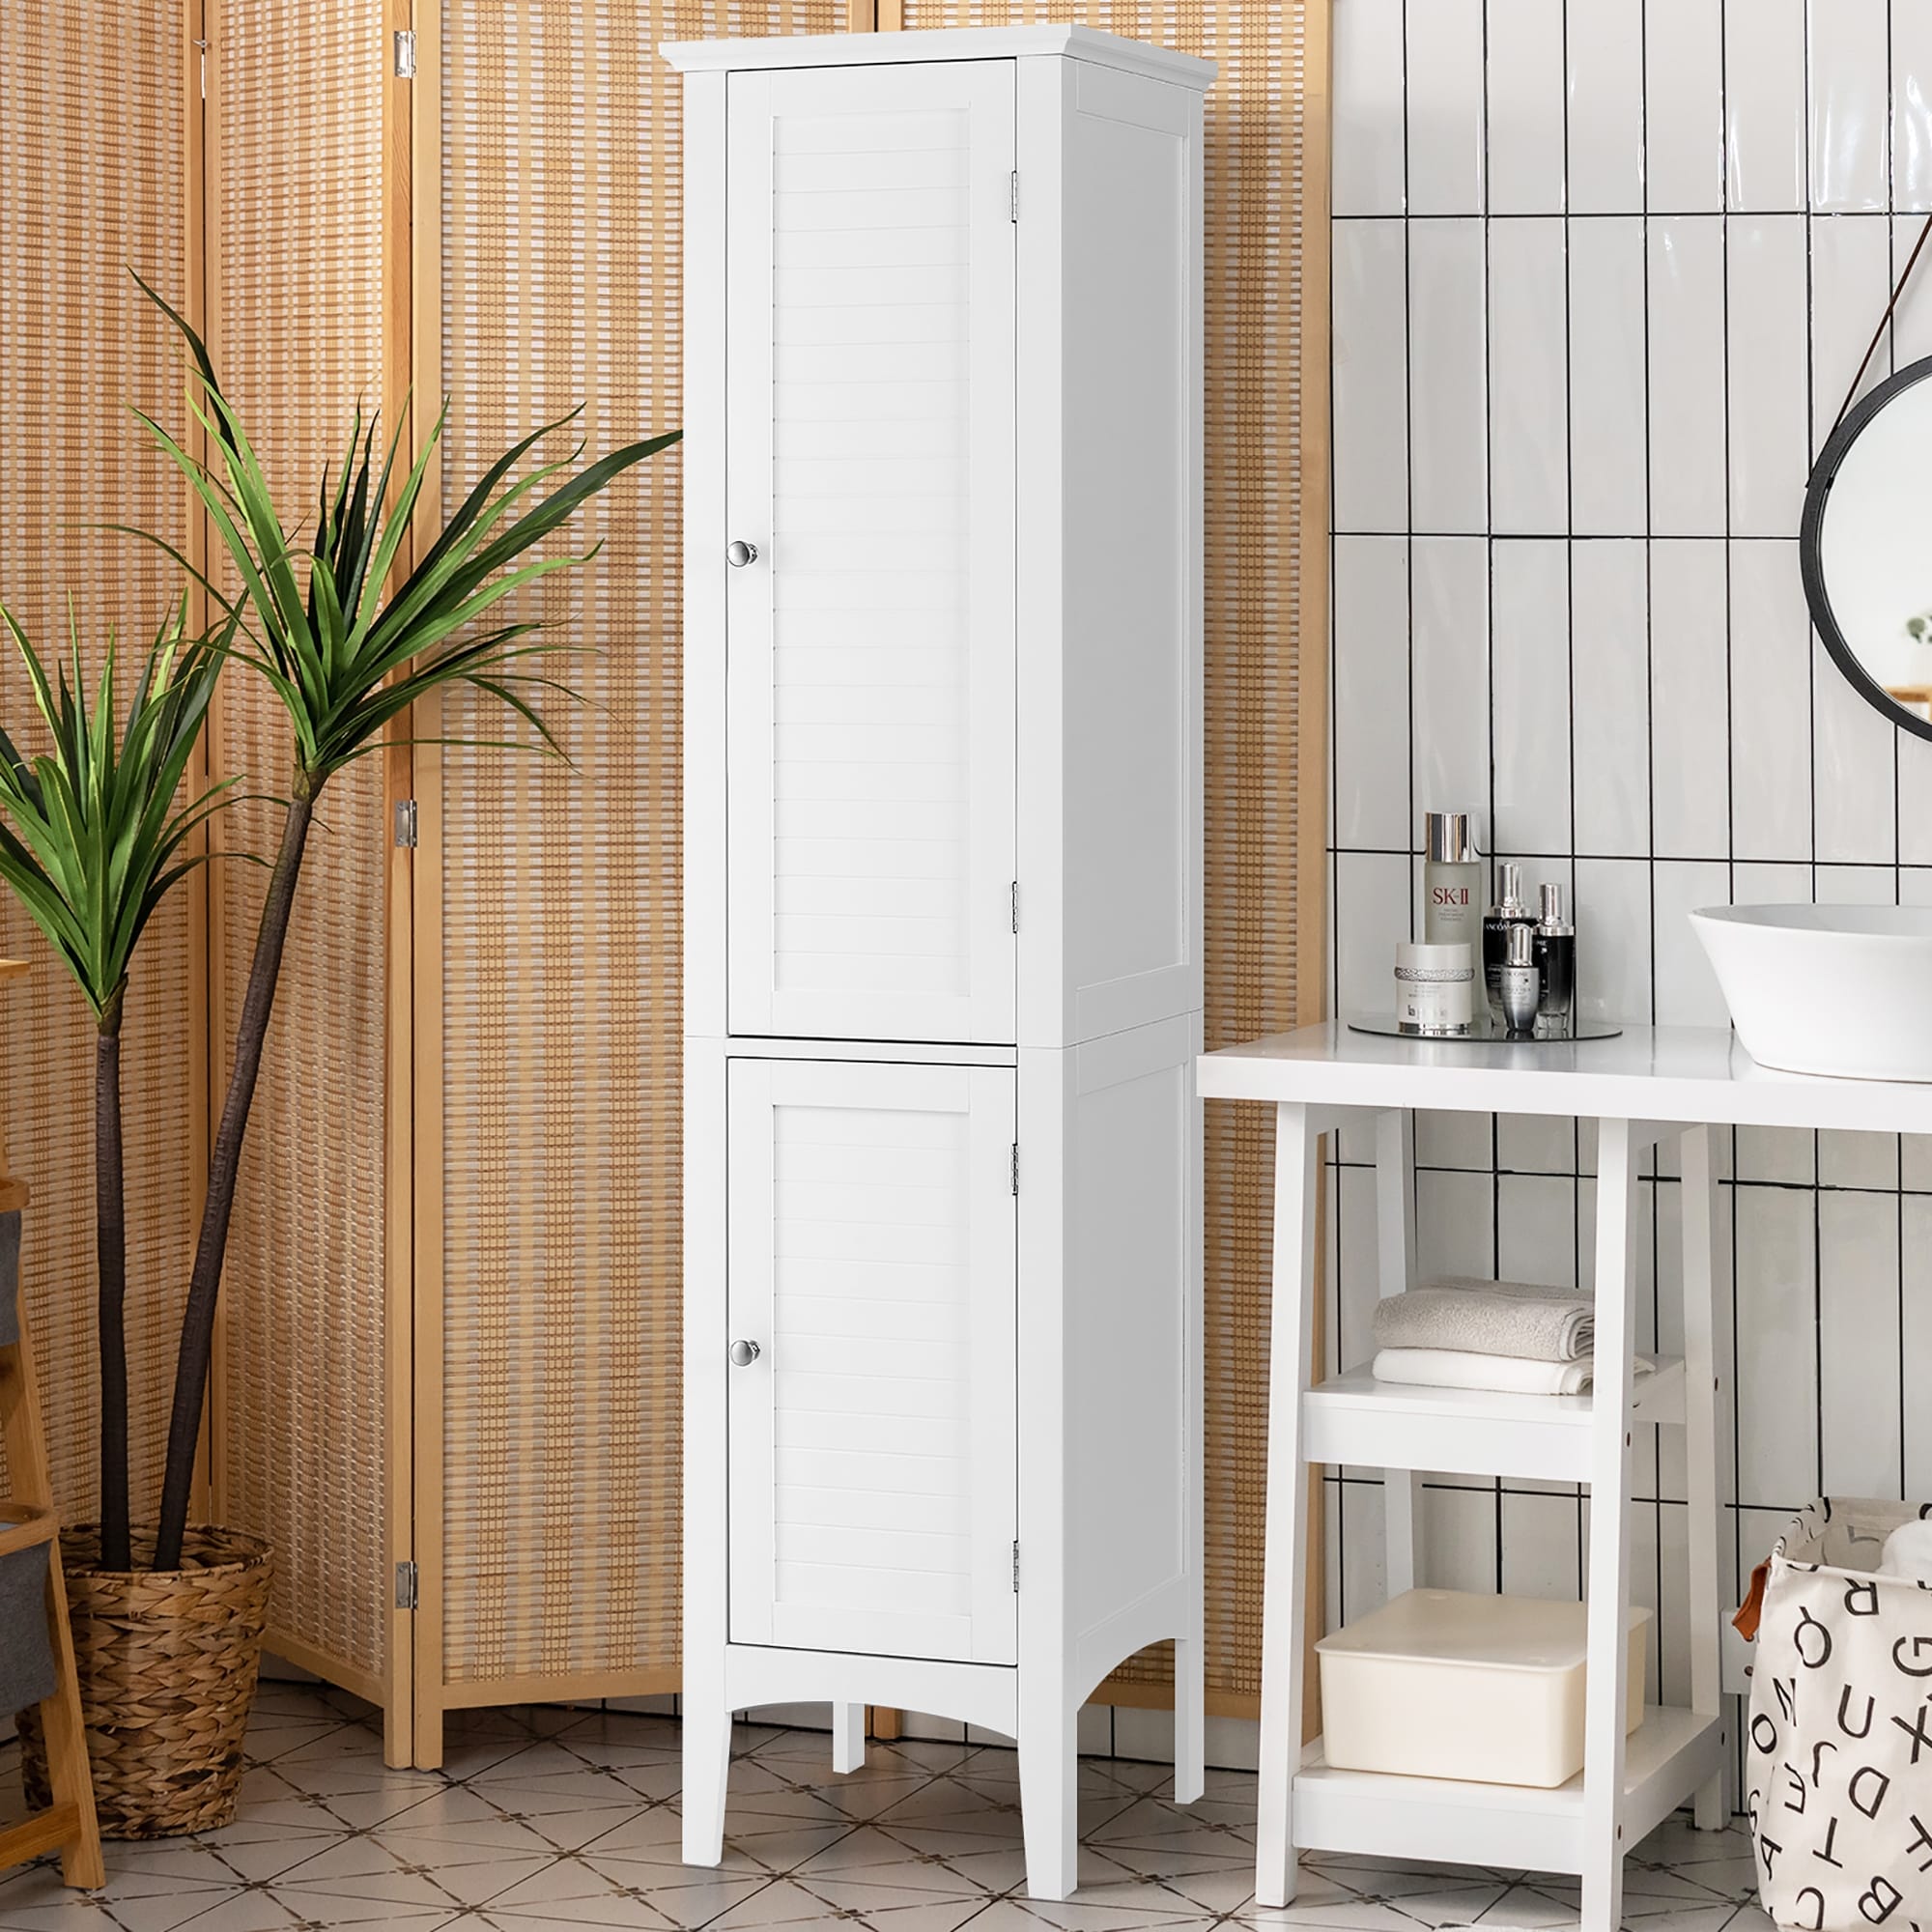 https://ak1.ostkcdn.com/images/products/is/images/direct/a28375f46150f6bda61eccef7fa43034245ac6f9/5-Tier-Wooden-Freestanding-Tower-Cabinet-Tall-Bathroom-Storage-Cabinet.jpg